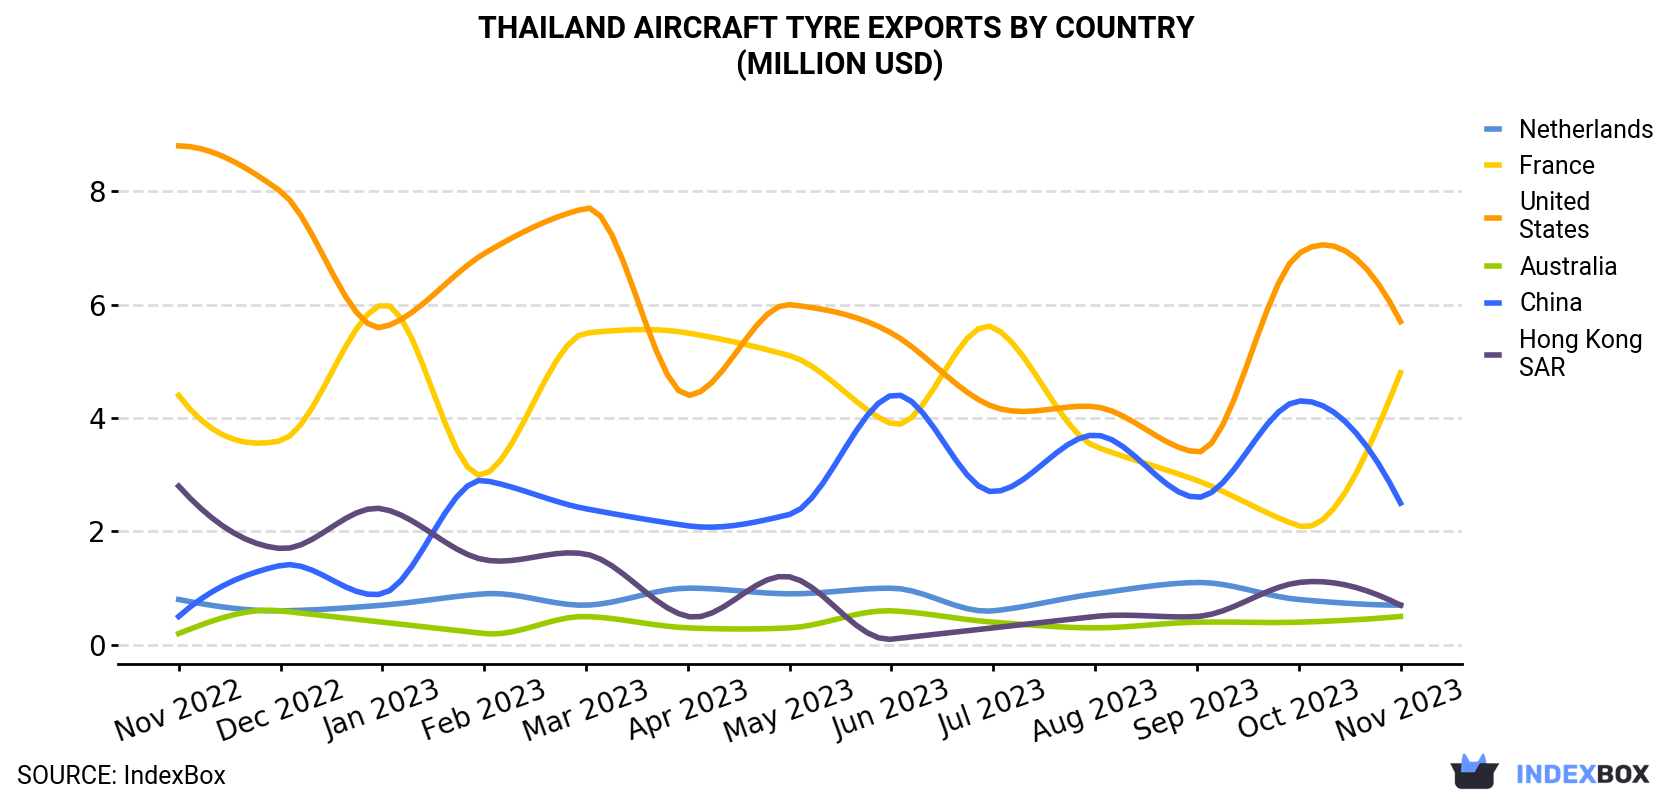 Thailand Aircraft Tyre Exports By Country (Million USD)